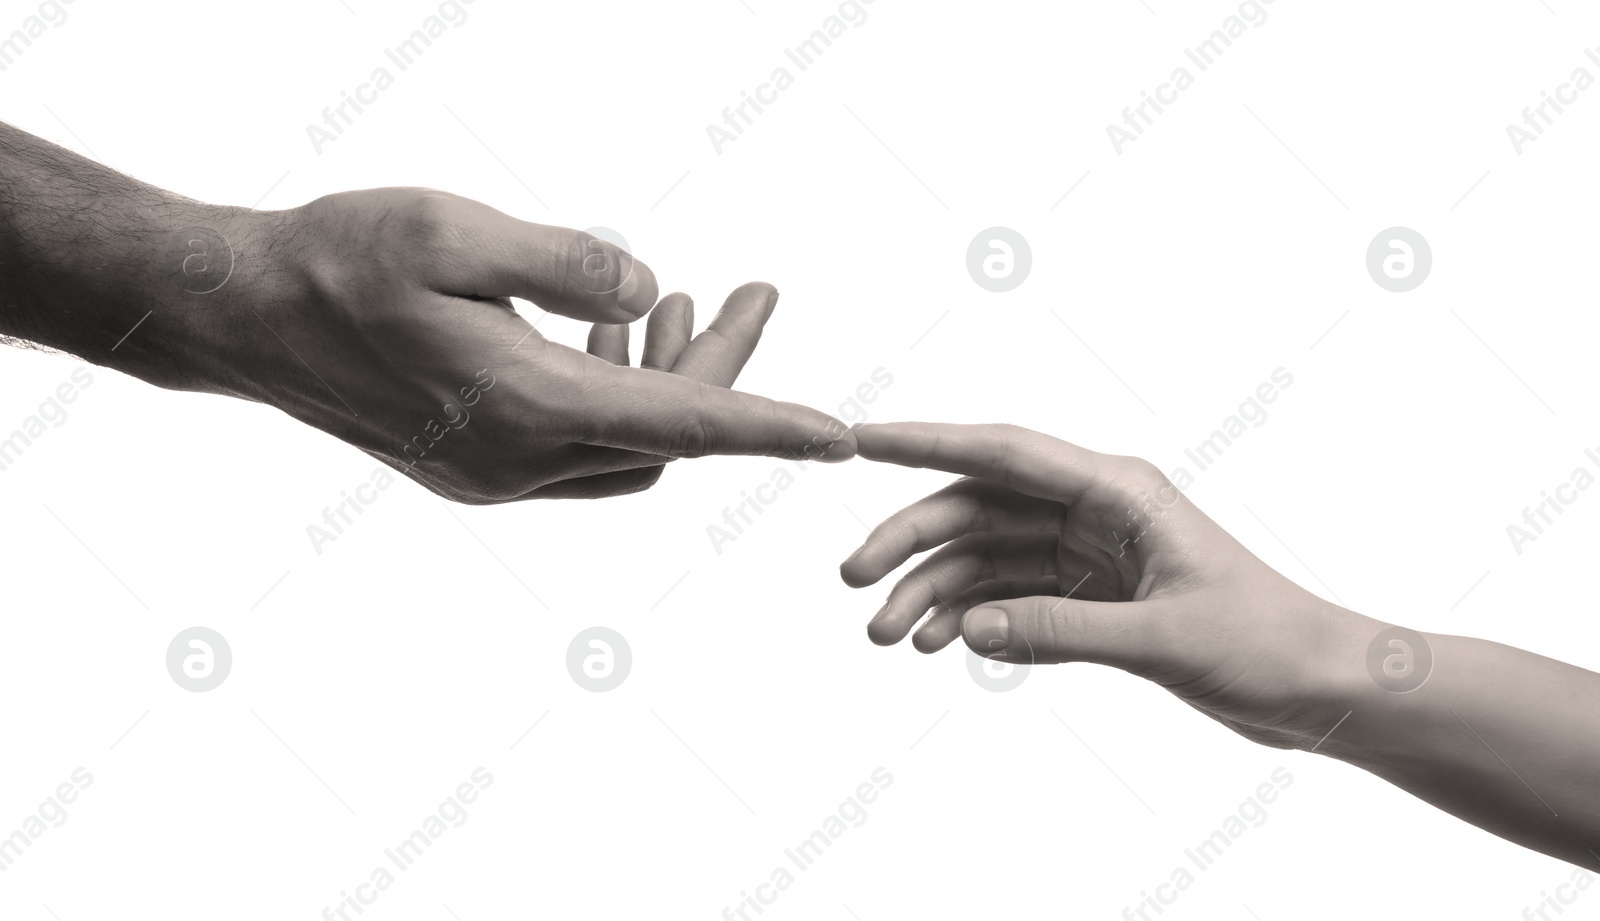 Image of Man and woman touching each other on white background, closeup view of hands. Black and white effect